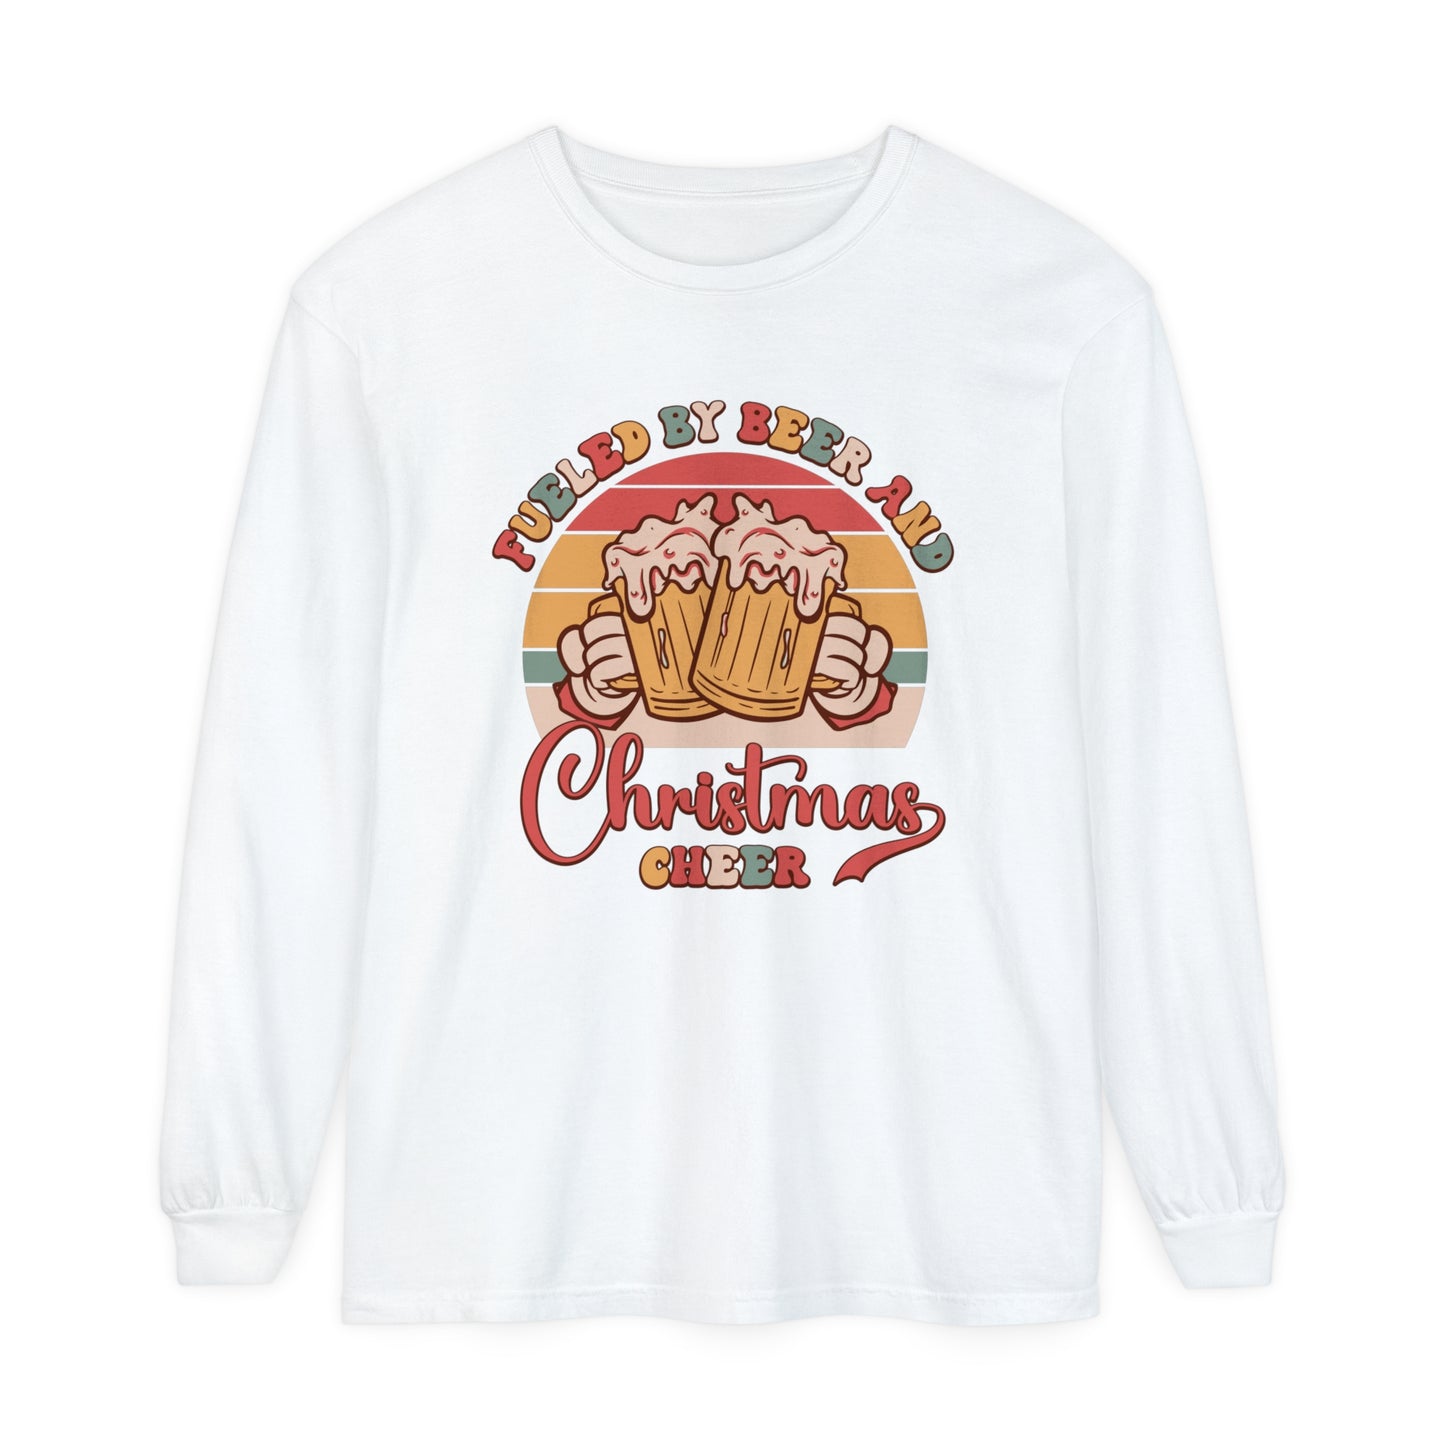 Fueled by beer and Christmas cheer Funny Drinking Holiday Adult Unisex Loose Long Sleeve T-Shirt